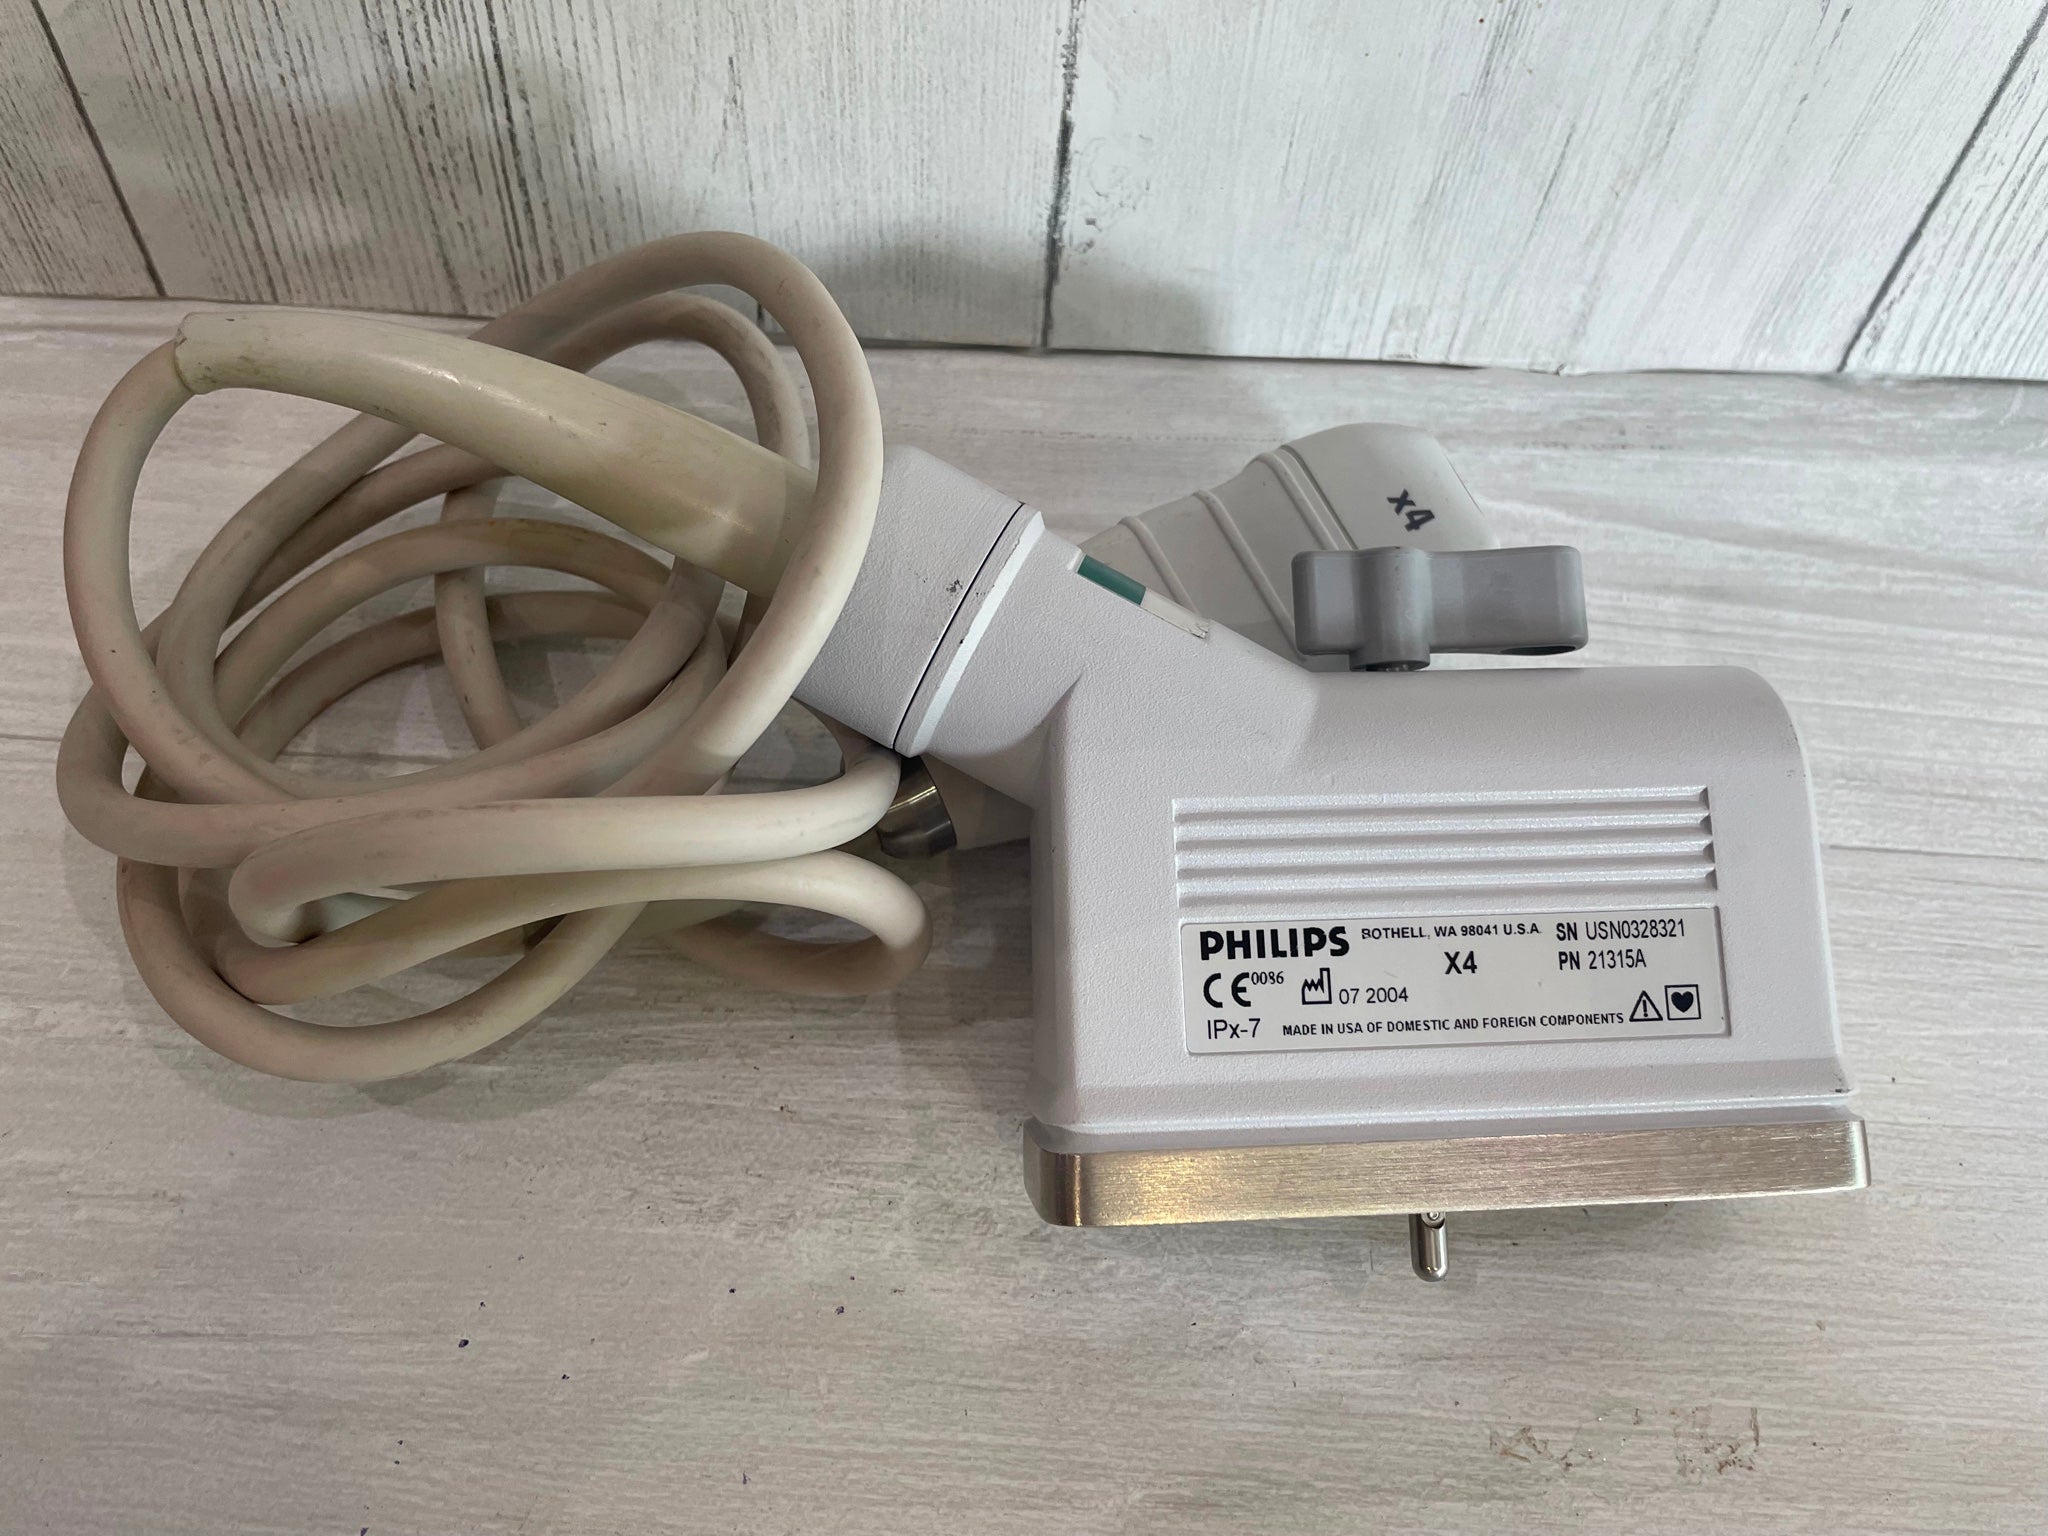 Philips x4 Ultrasound Probe Transducer 2004 DIAGNOSTIC ULTRASOUND MACHINES FOR SALE